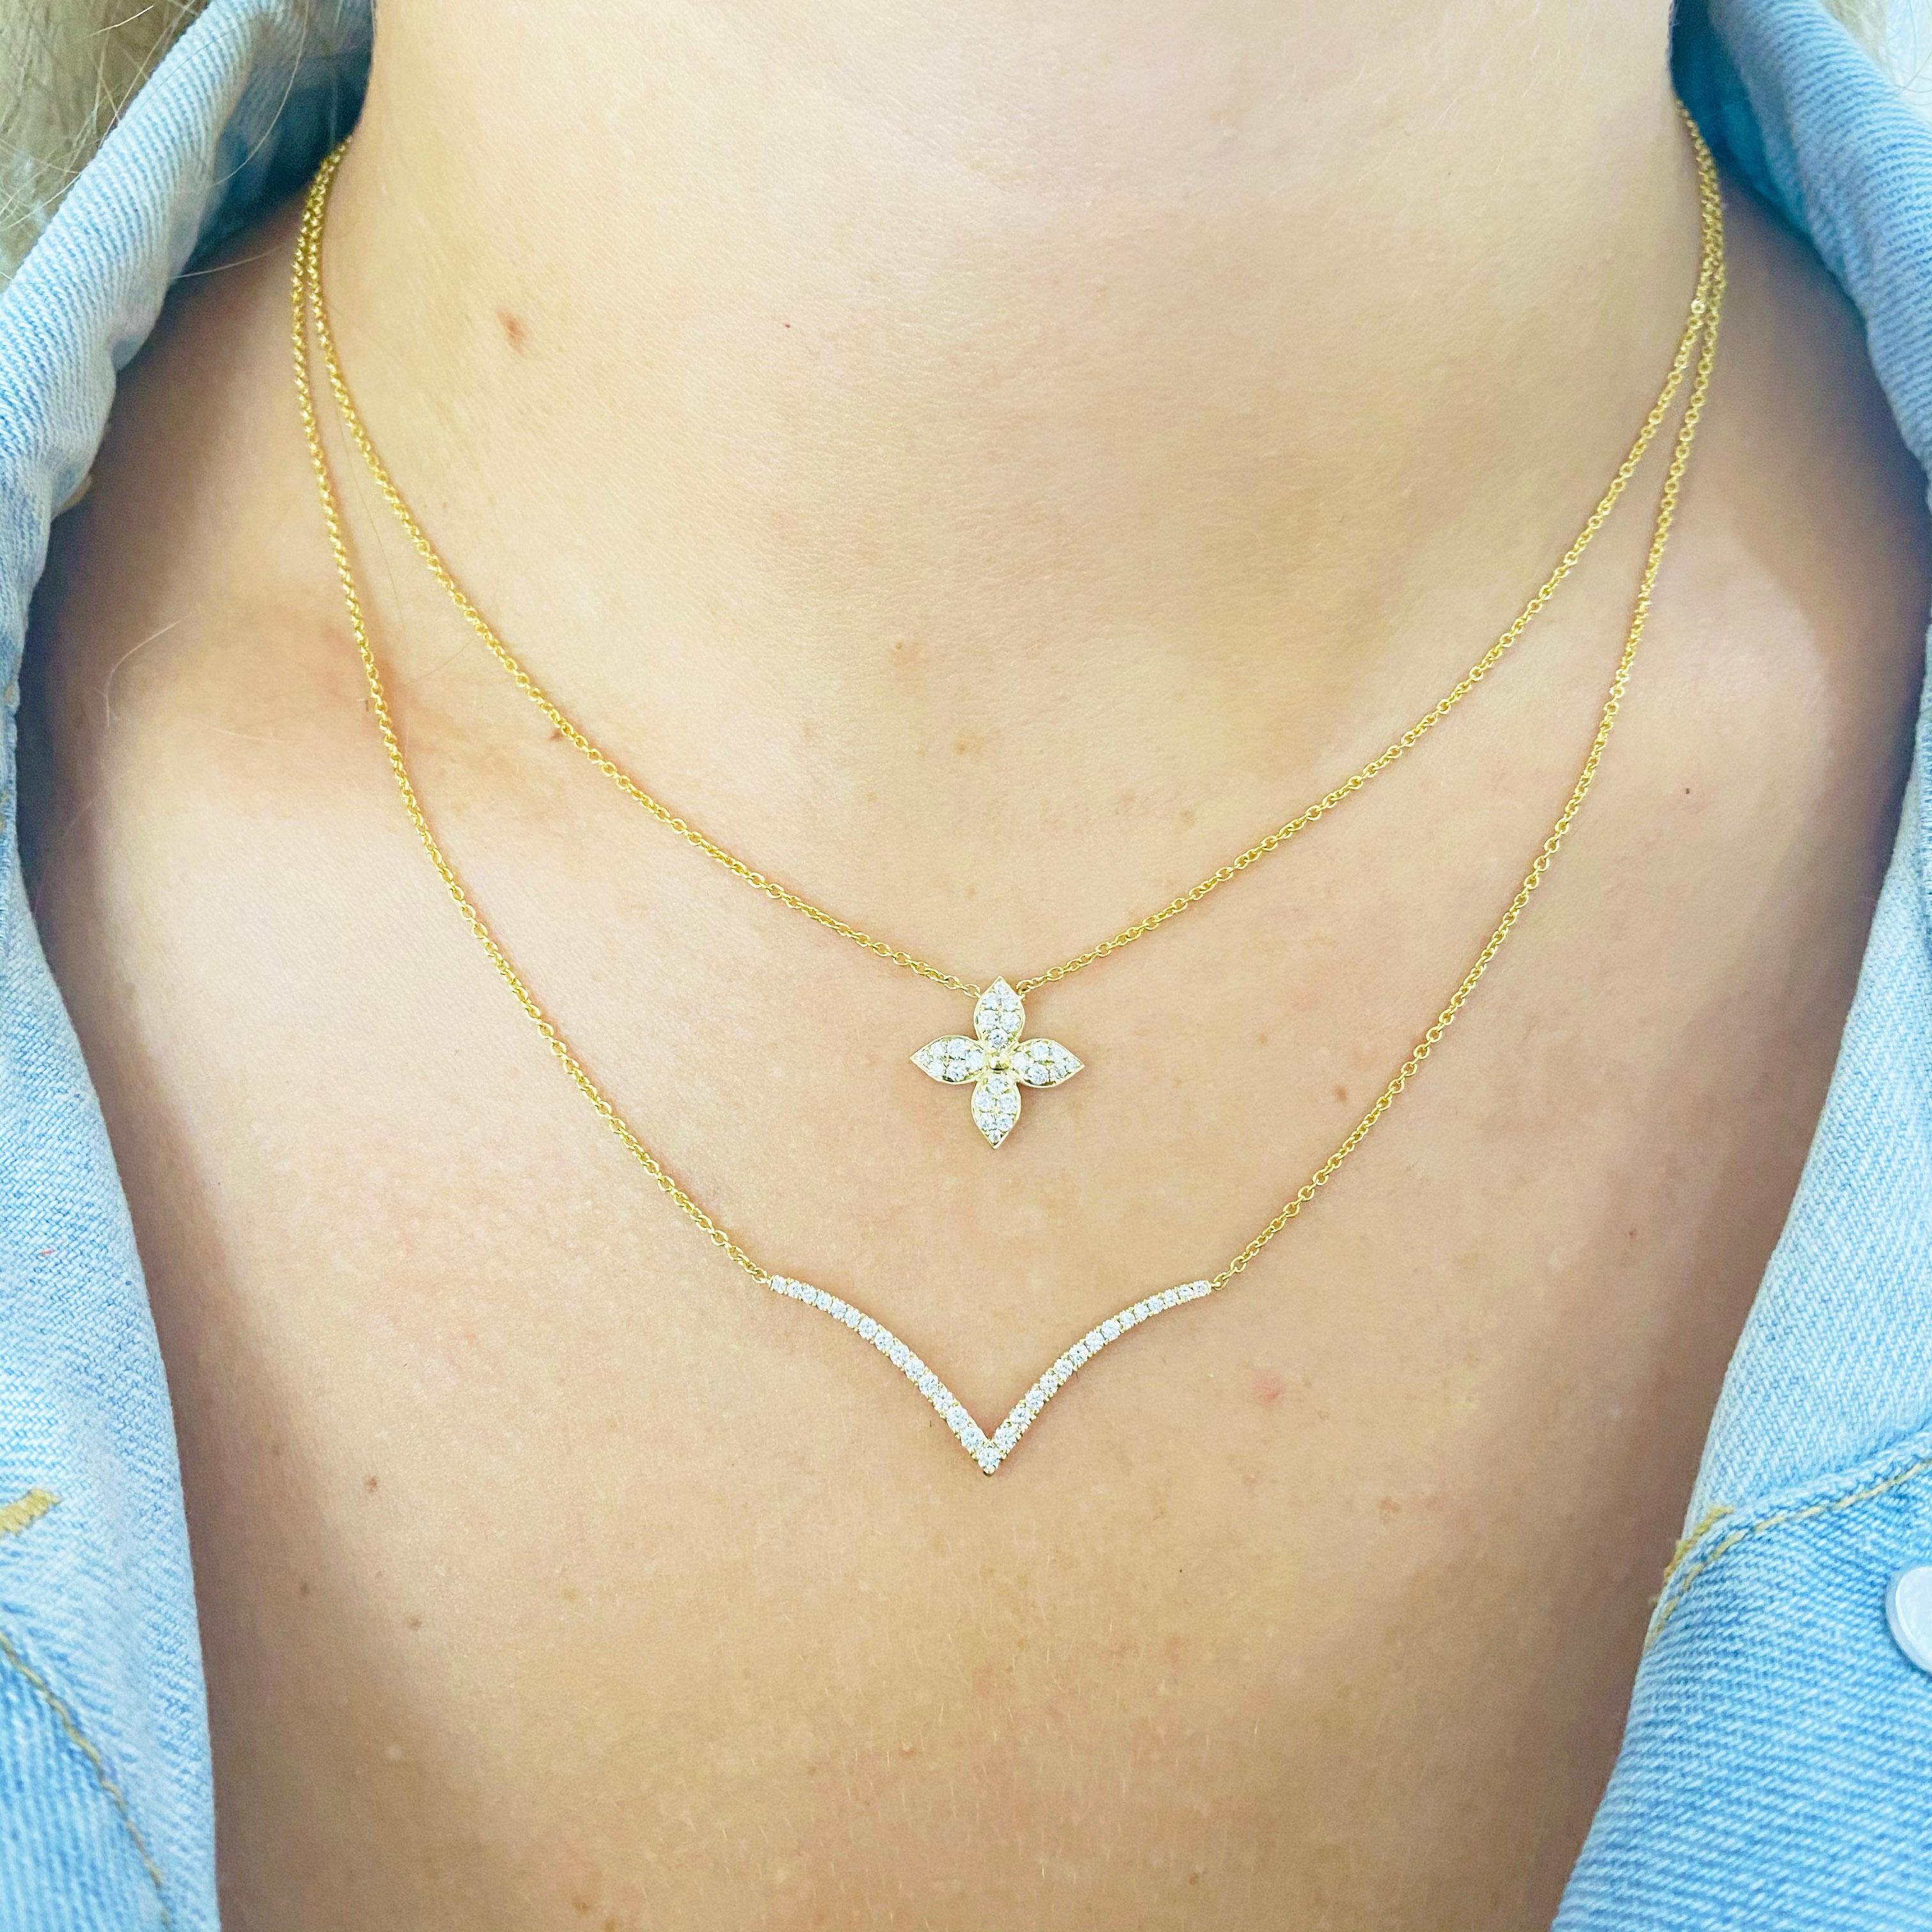 This gorgeous 14 karat gold curved V bar style necklace dripping with glamorous white diamonds is flattering on any neck! This necklace is very versatile, and can be dressed up or dressed down for day and night looks. The 18 inch necklace layers